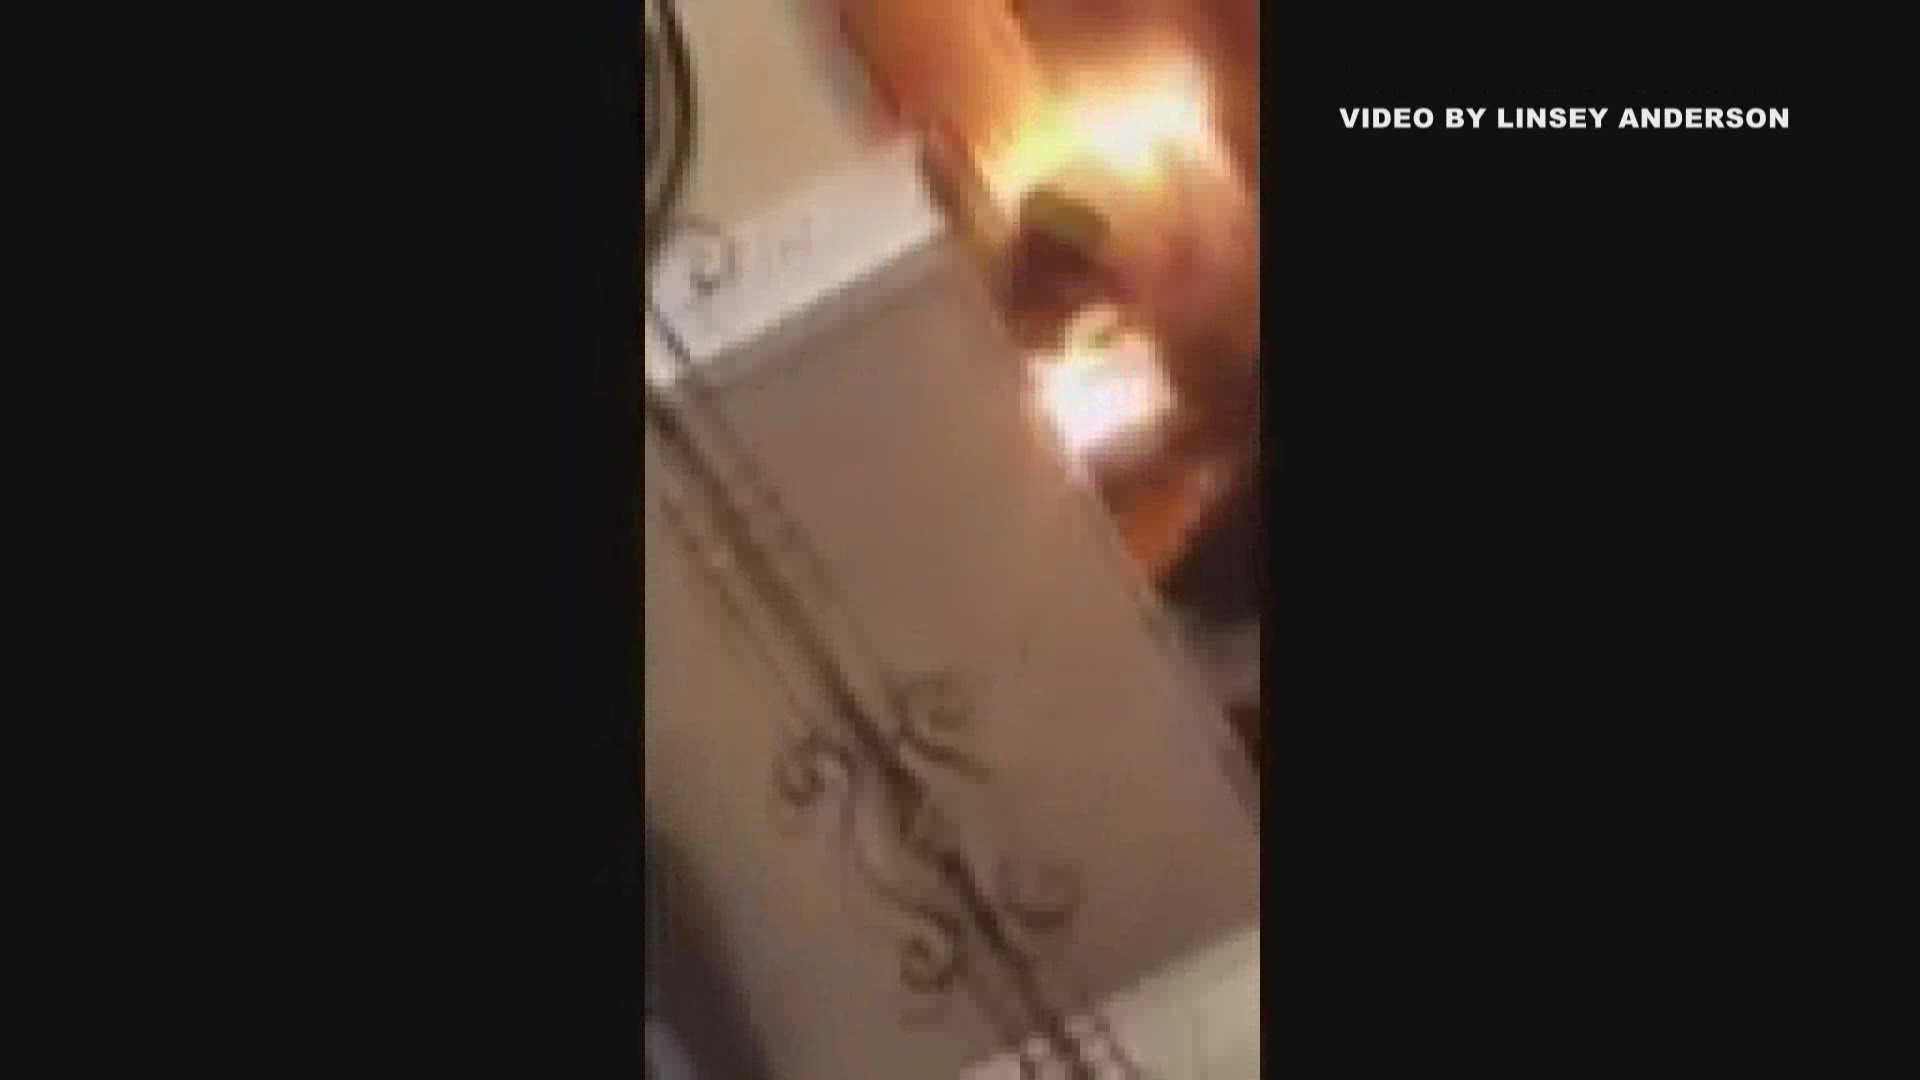 Home video shows a house fire starting when a battery blows up.